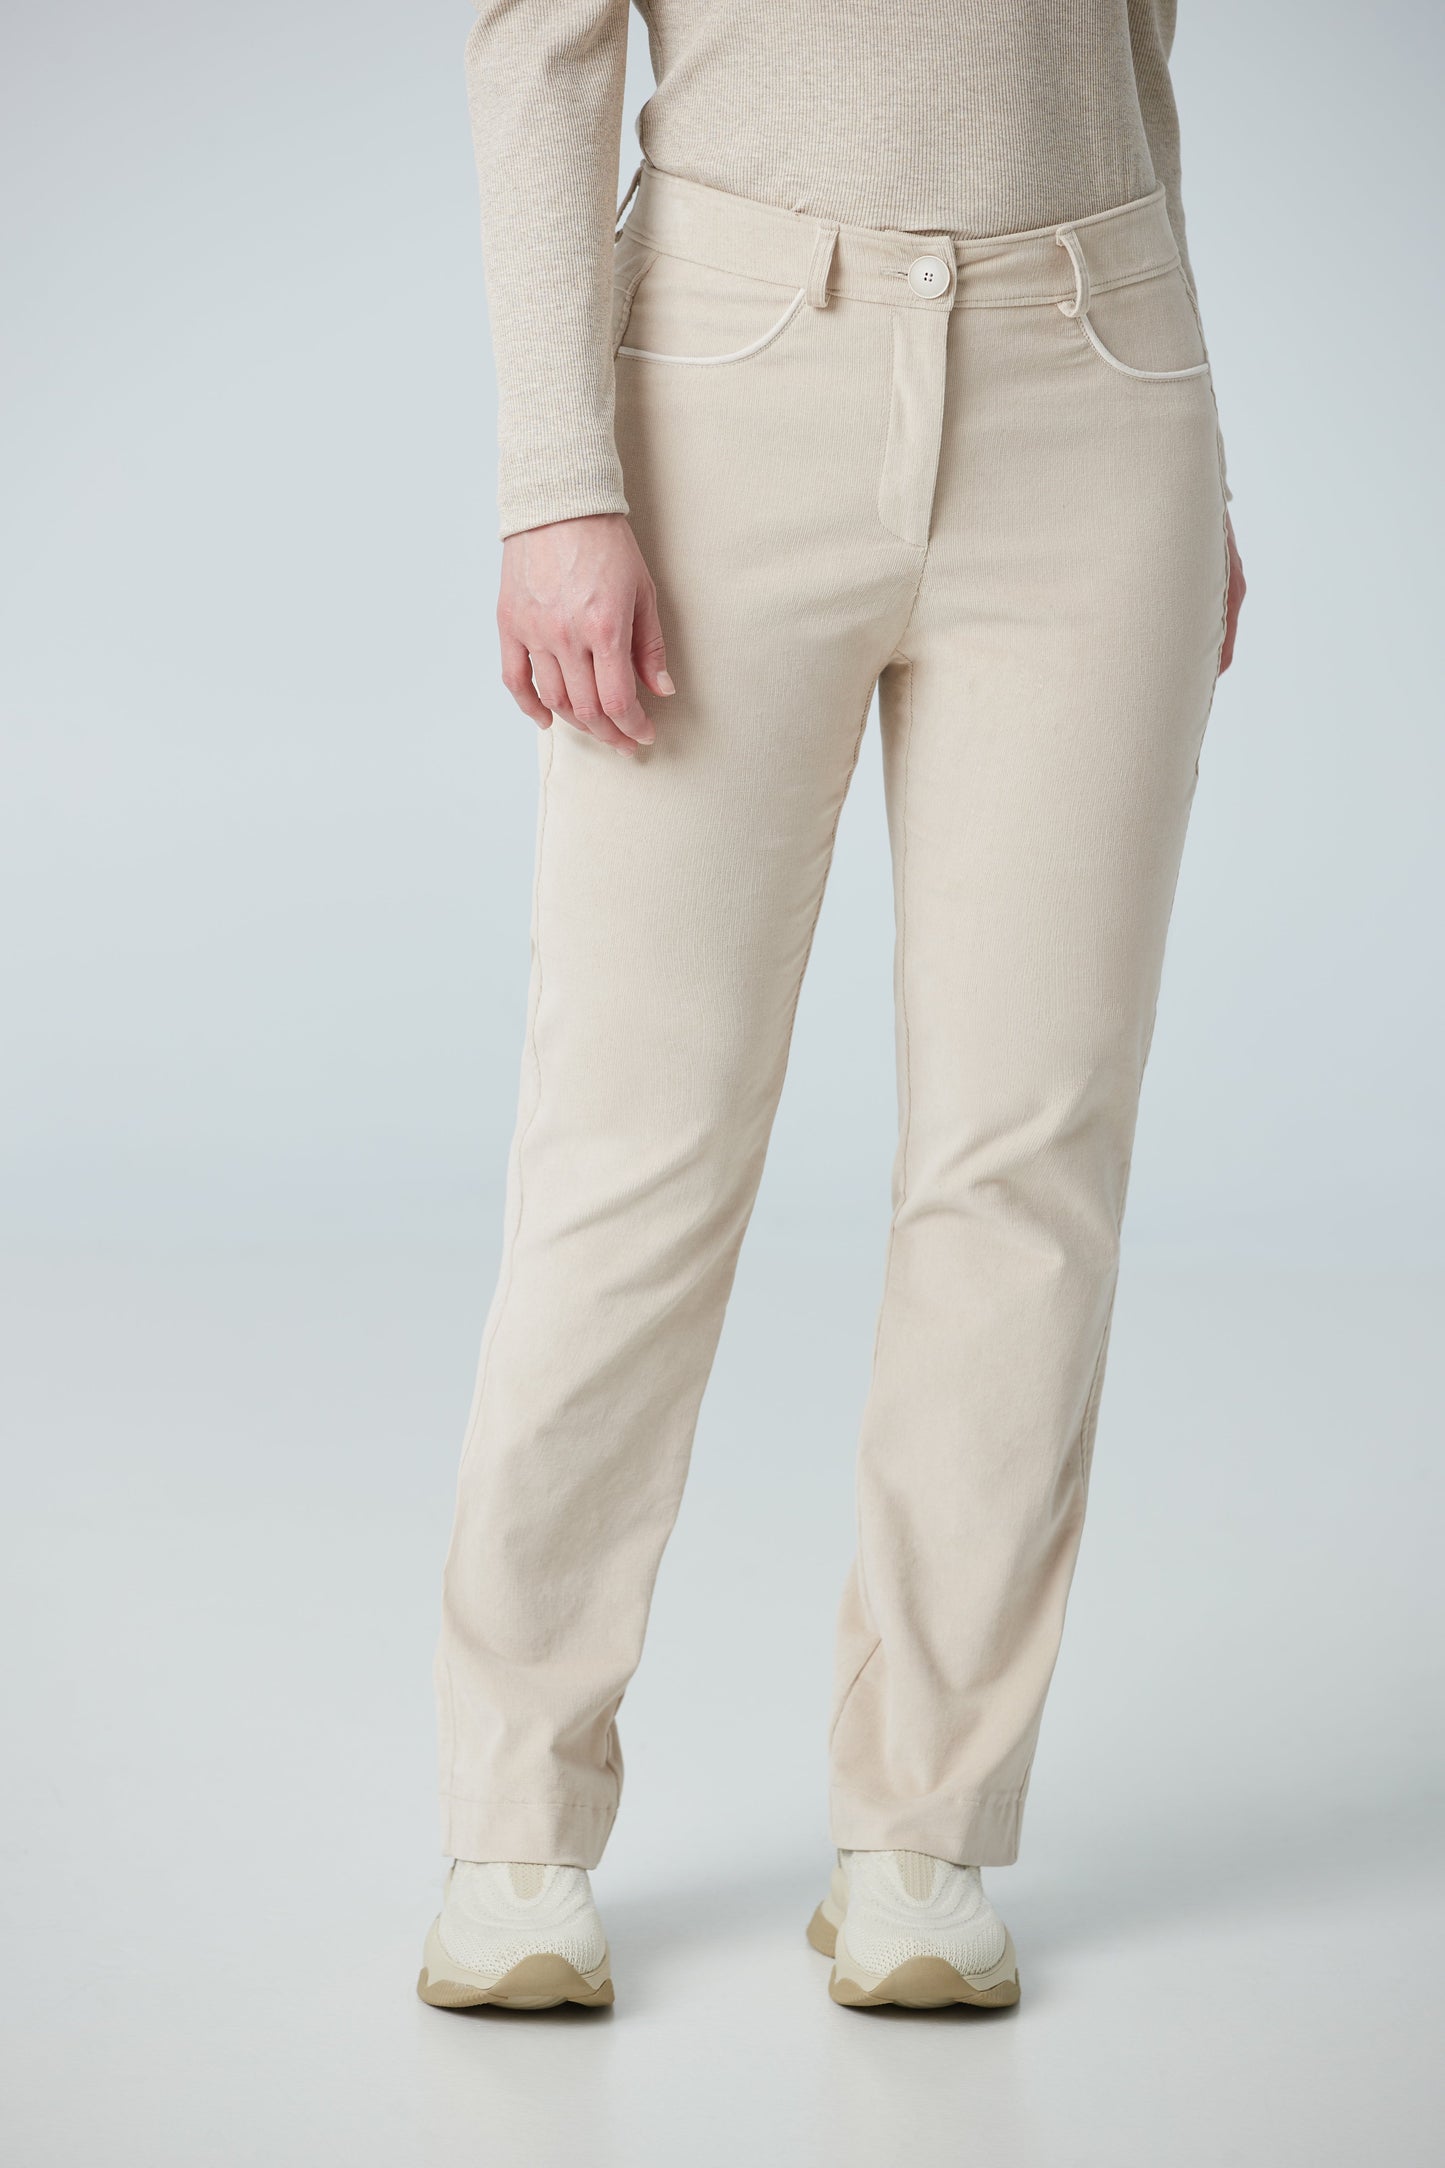 Straight leg crop pant with faux leather insert